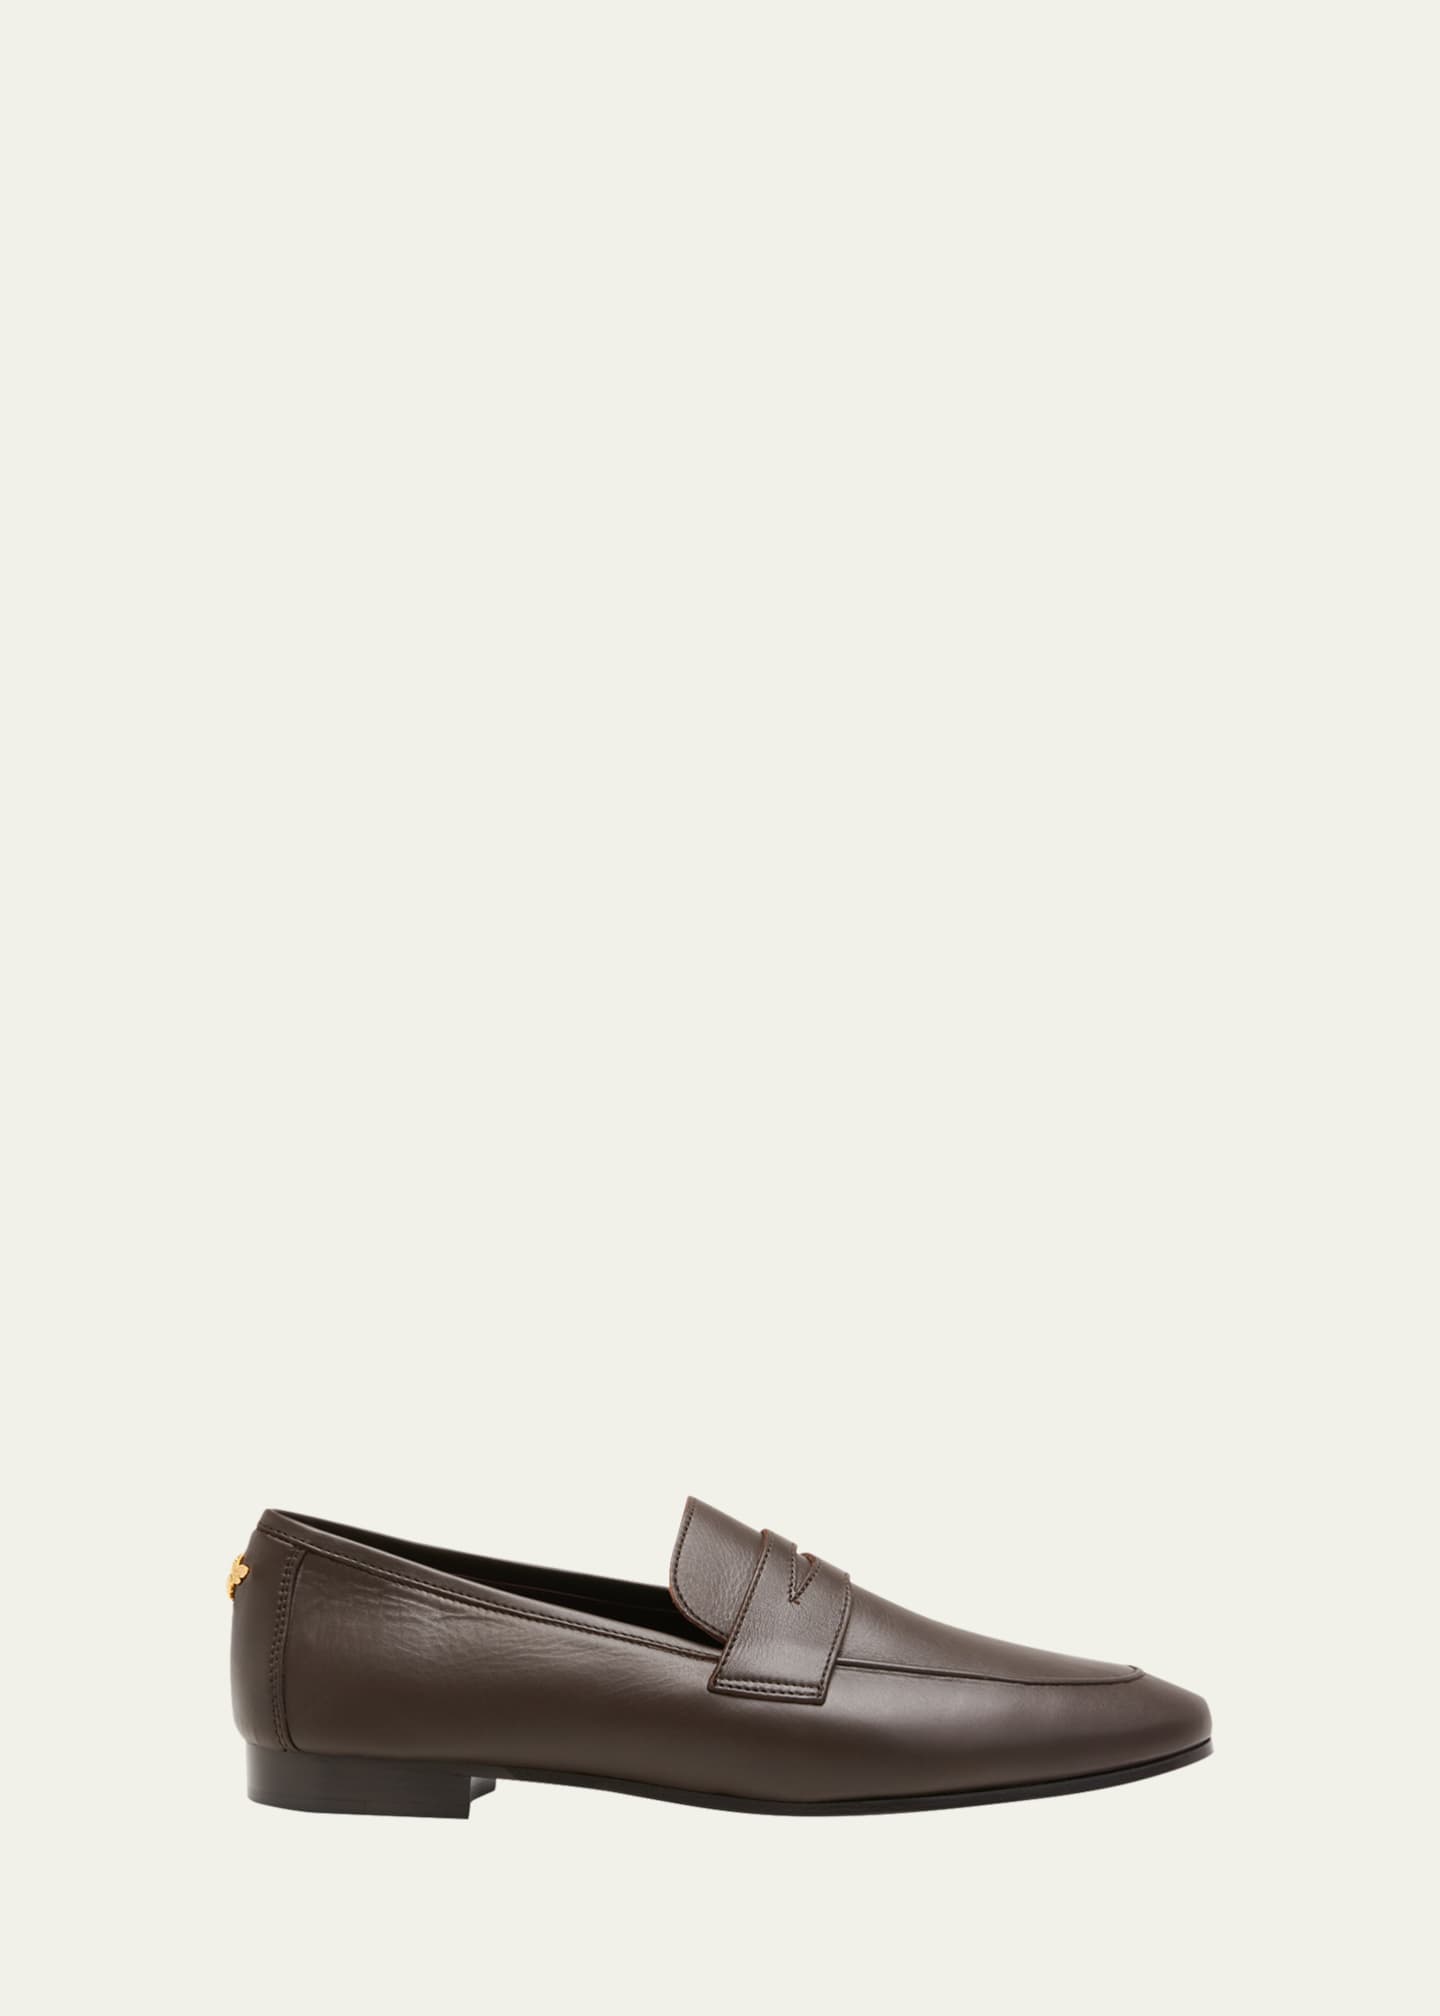 Bougeotte Calf Leather Penny Loafers - Bergdorf Goodman